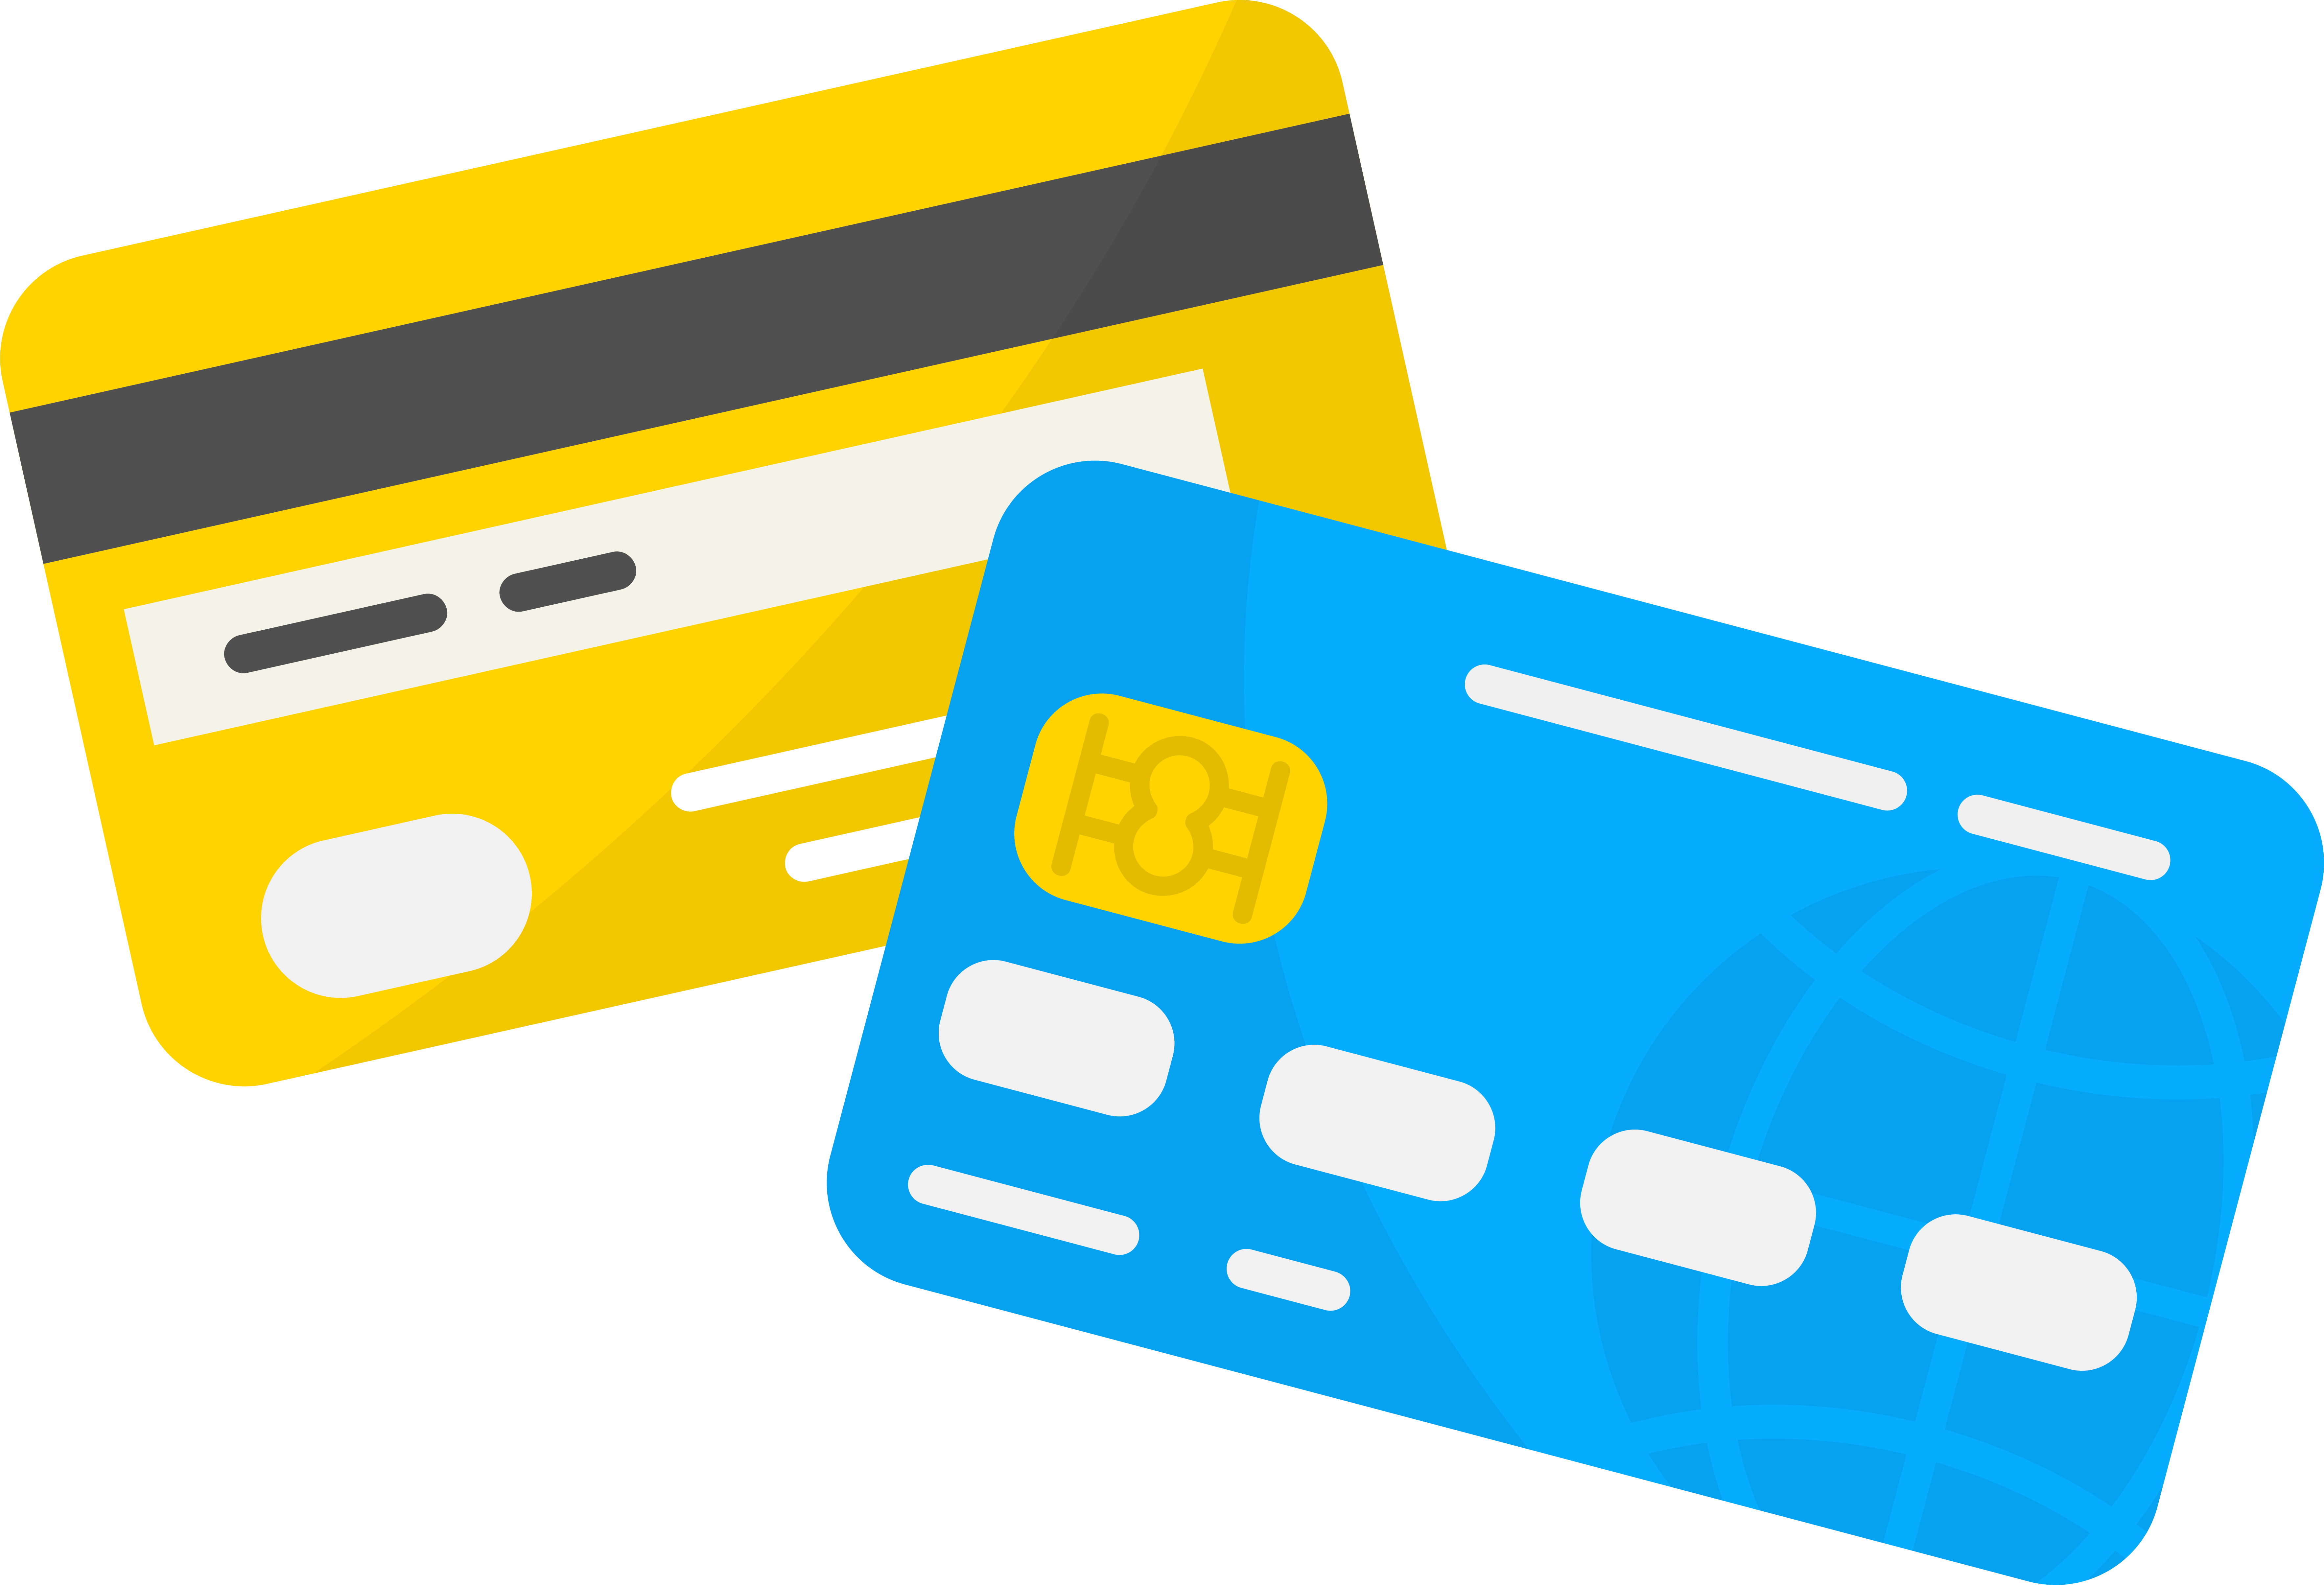 difference-between-credit-card-and-debit-card